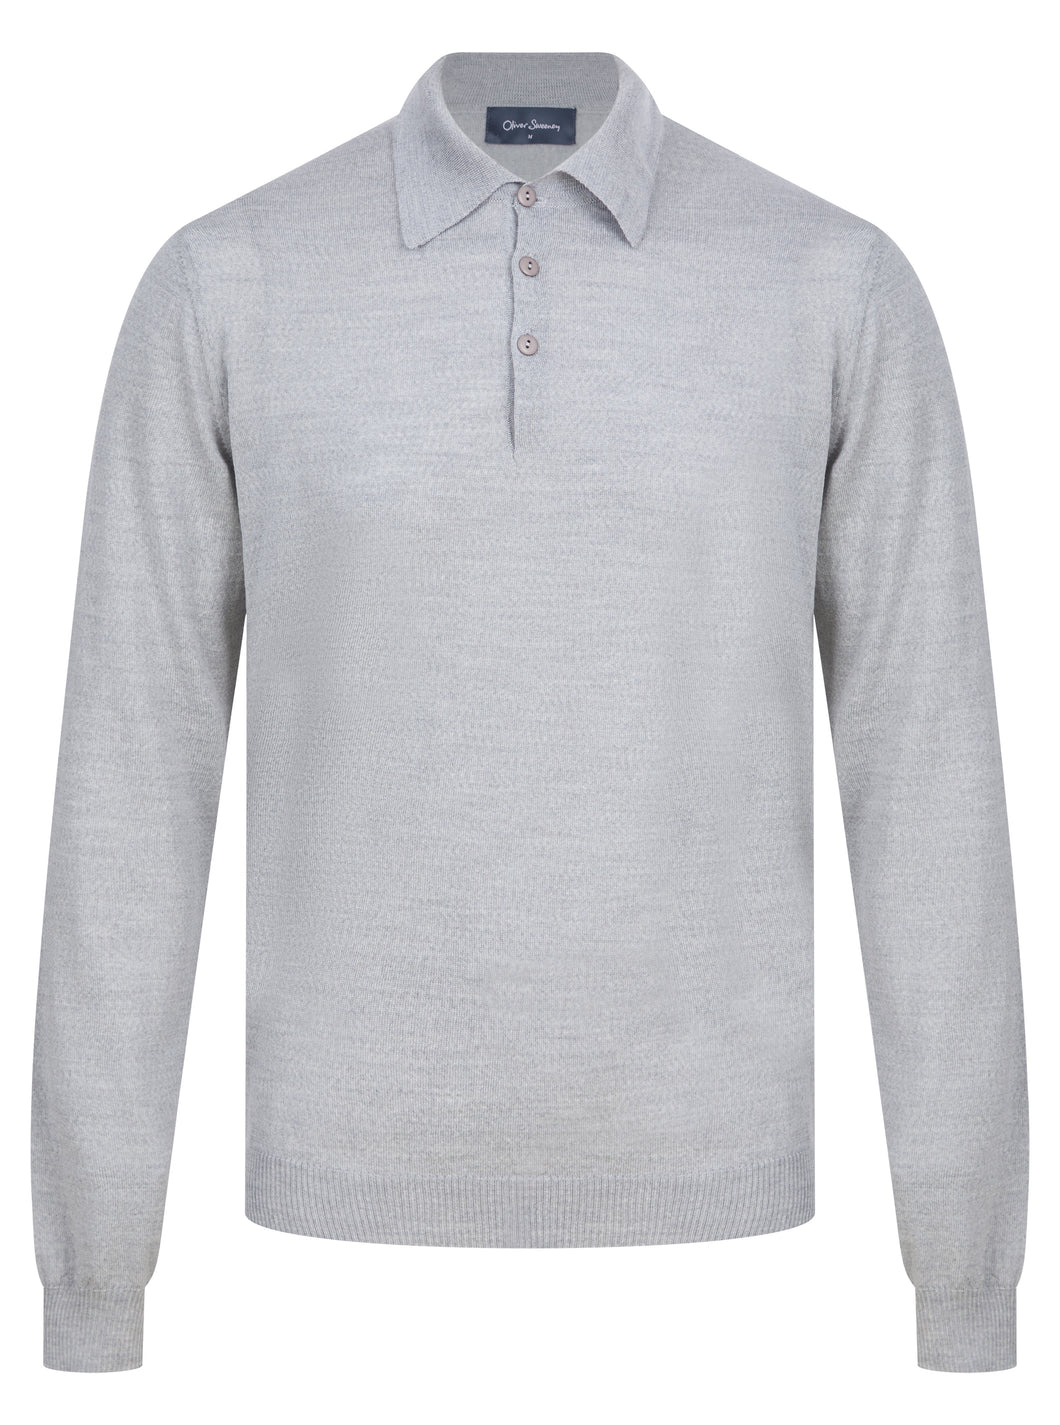 Oliver Sweeney Sulby Polo Grey